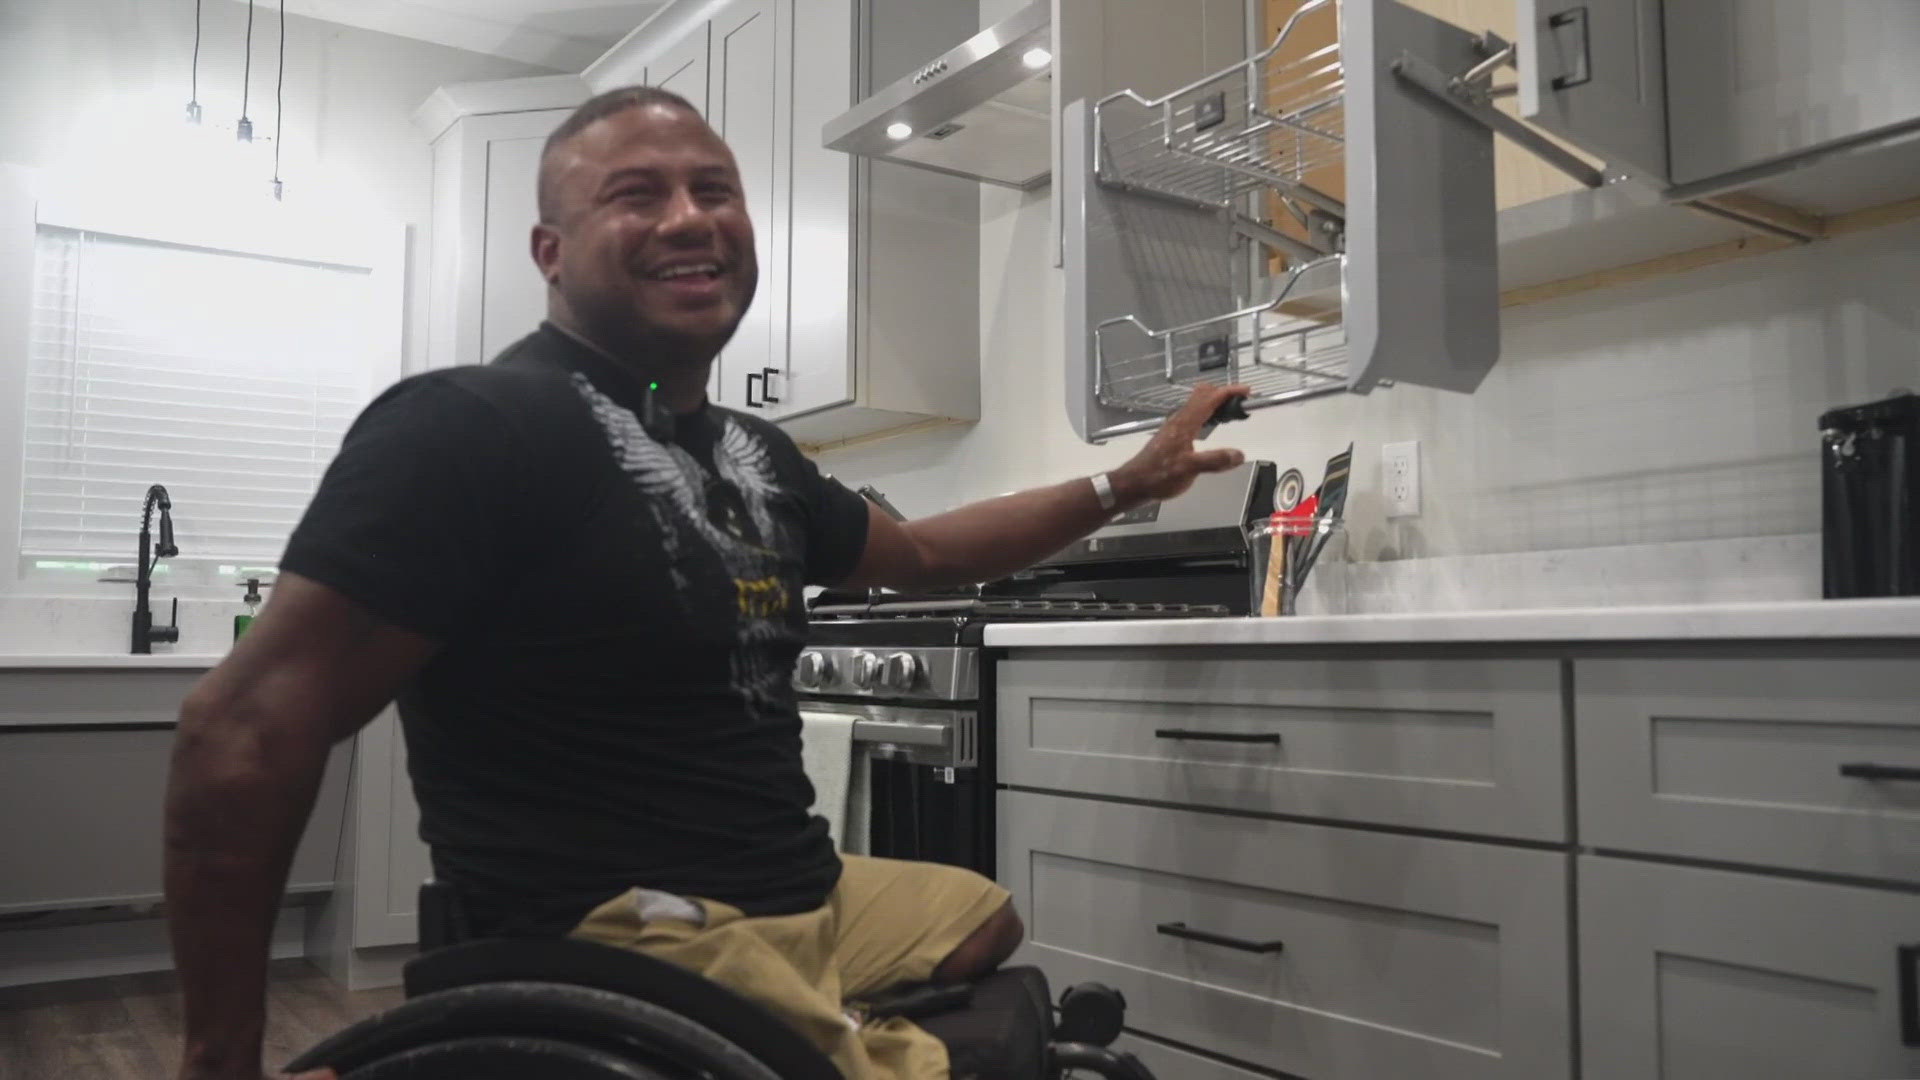 Ryan Major was honored with a fully furnished home for his service. The home was built in 21 days with the help of 80 volunteers.